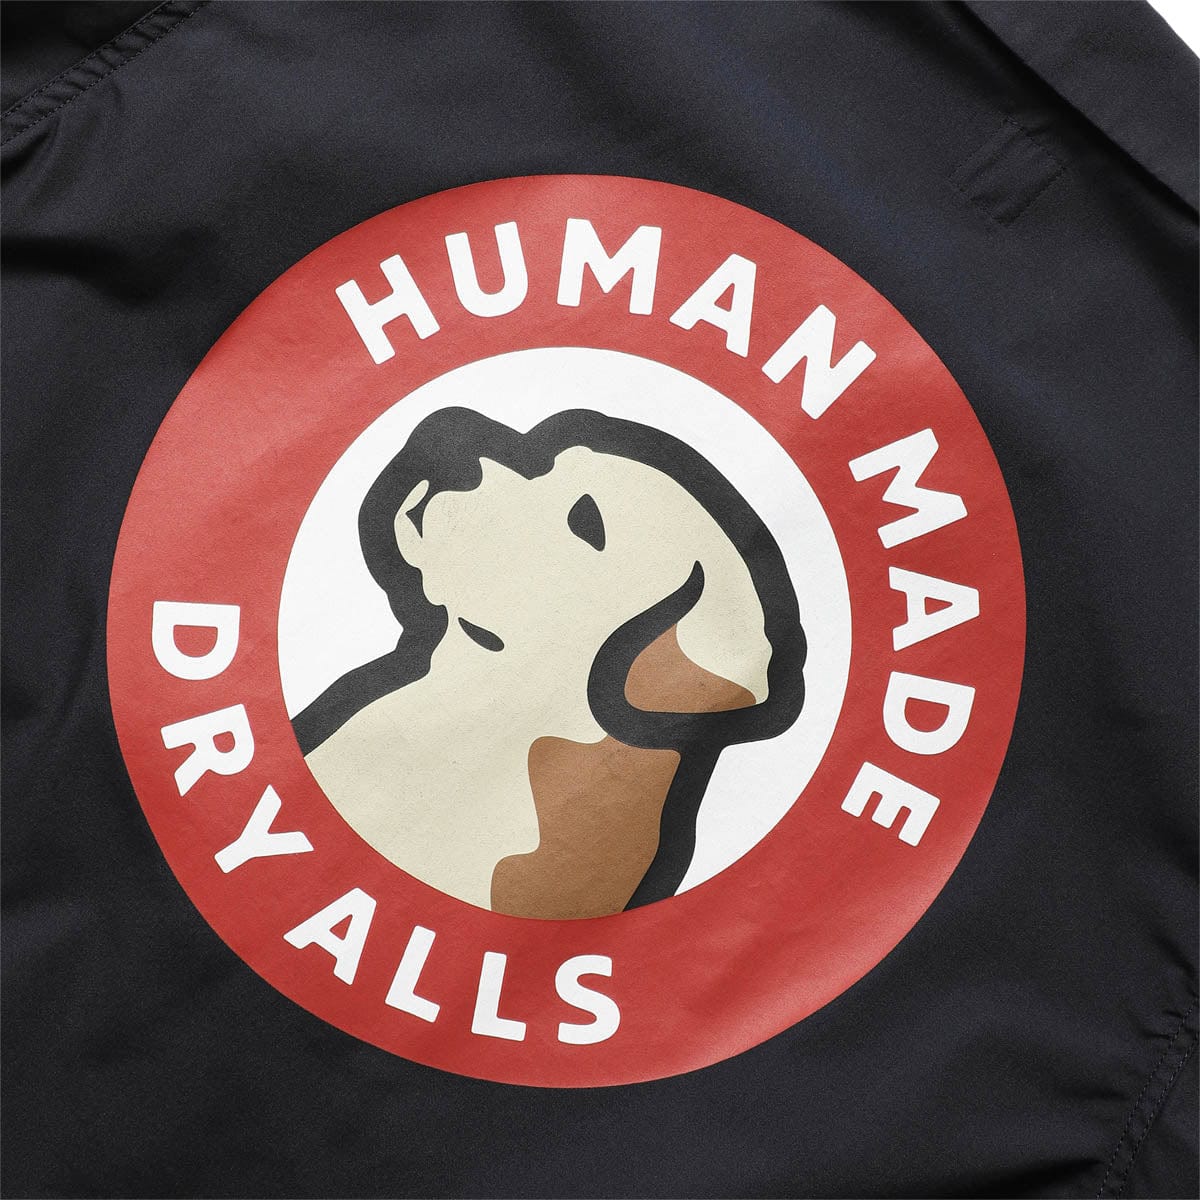 HUMAN MADE DRIZZLER JACKET